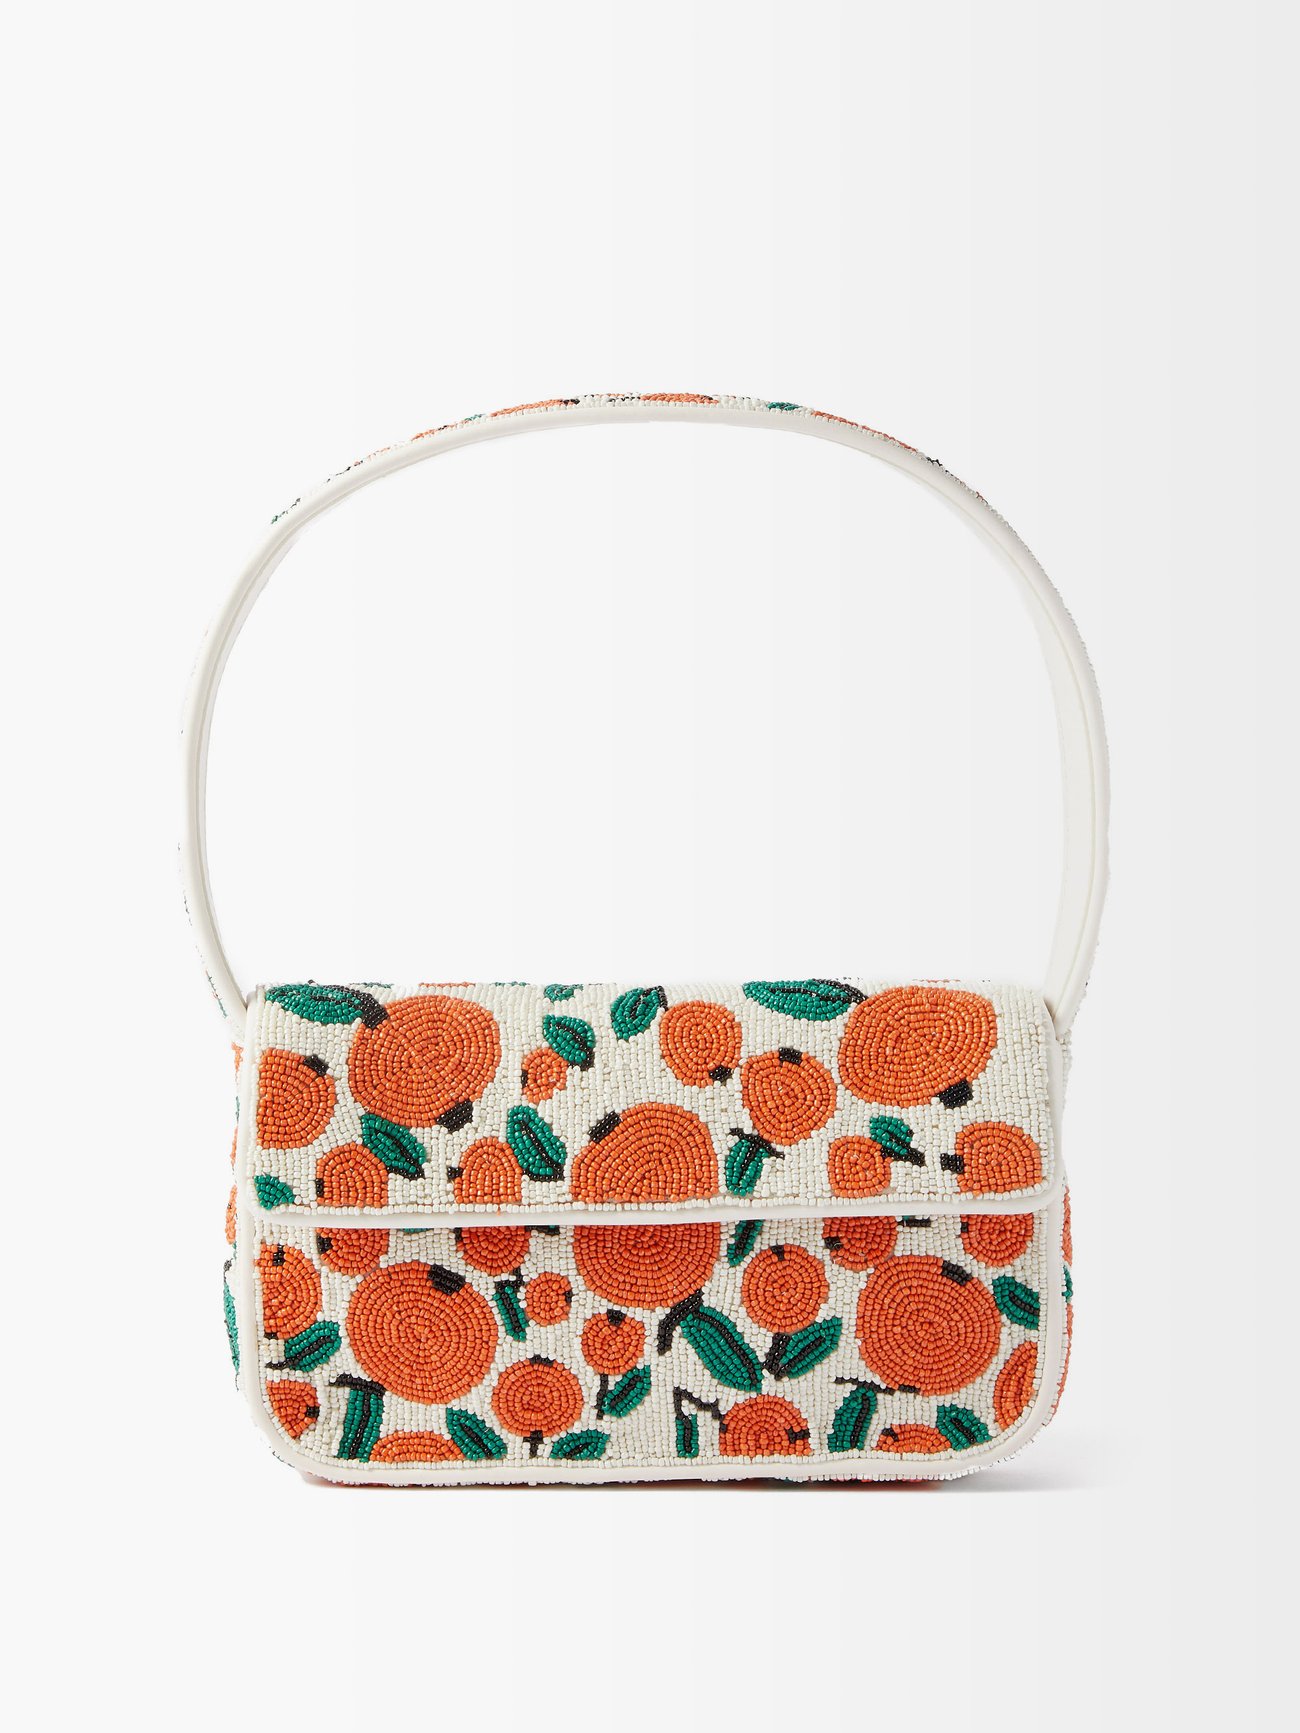 Staud white and orange Tommy beaded shoulder bag Refreshed with ripe orange fruit motifs. This staud beaded shoulder bag is shaped to a compact 1990s-era size and meticulously embellished with fine beading.